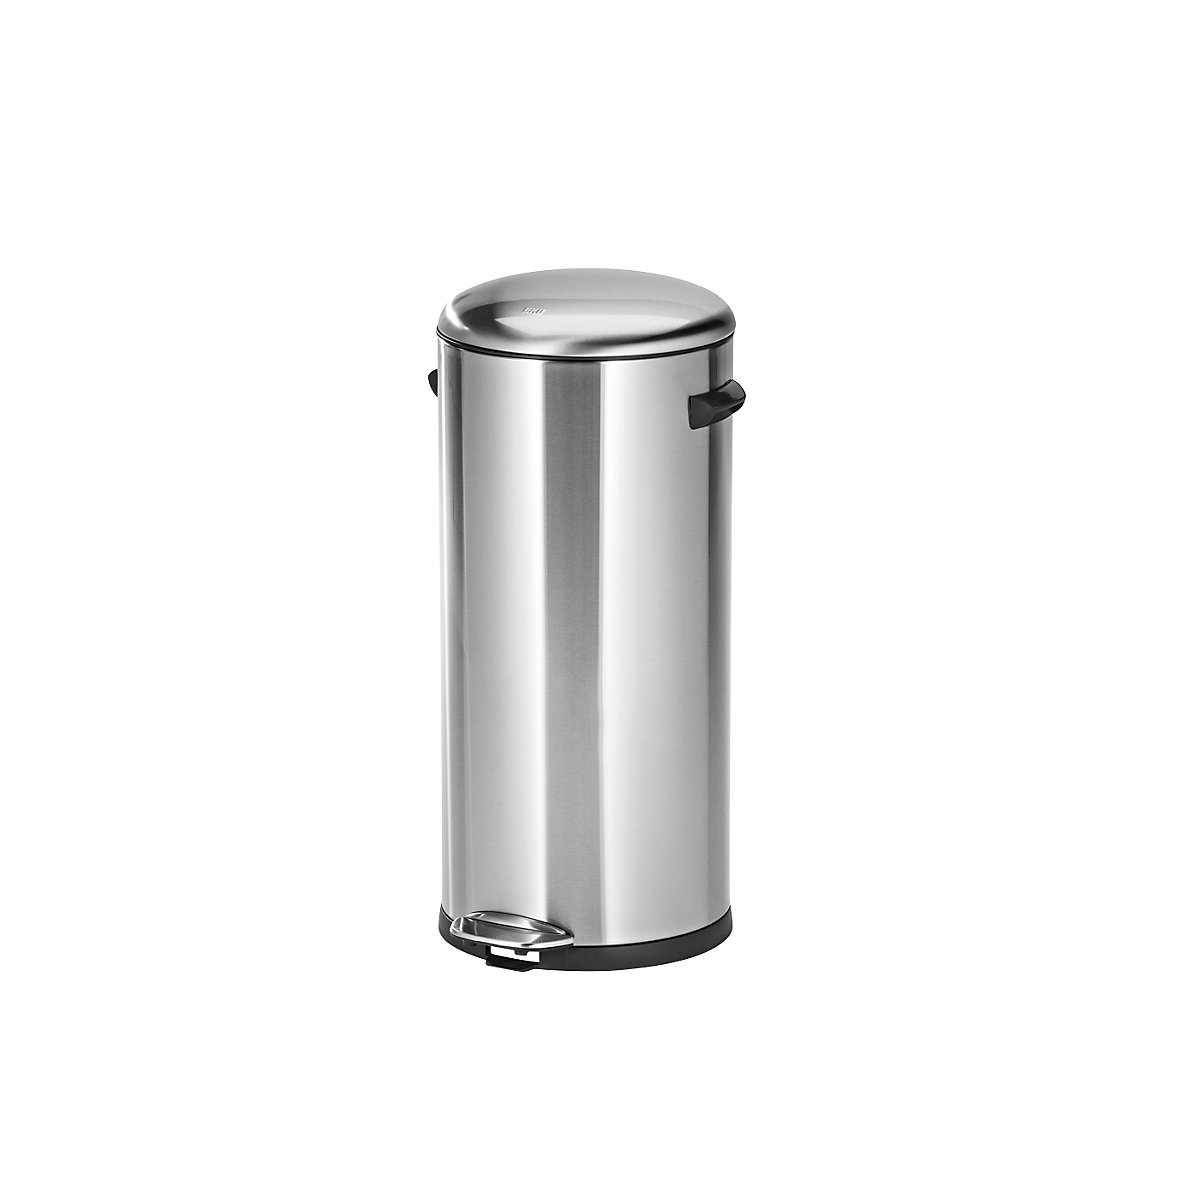 https://images.kkeu.de/is/image/BEG/Waste_systems/Waste_collectors/Stainless_steel_pedal_bin_round_pdplarge-mrd--000023485044_PRD_org_all.jpg